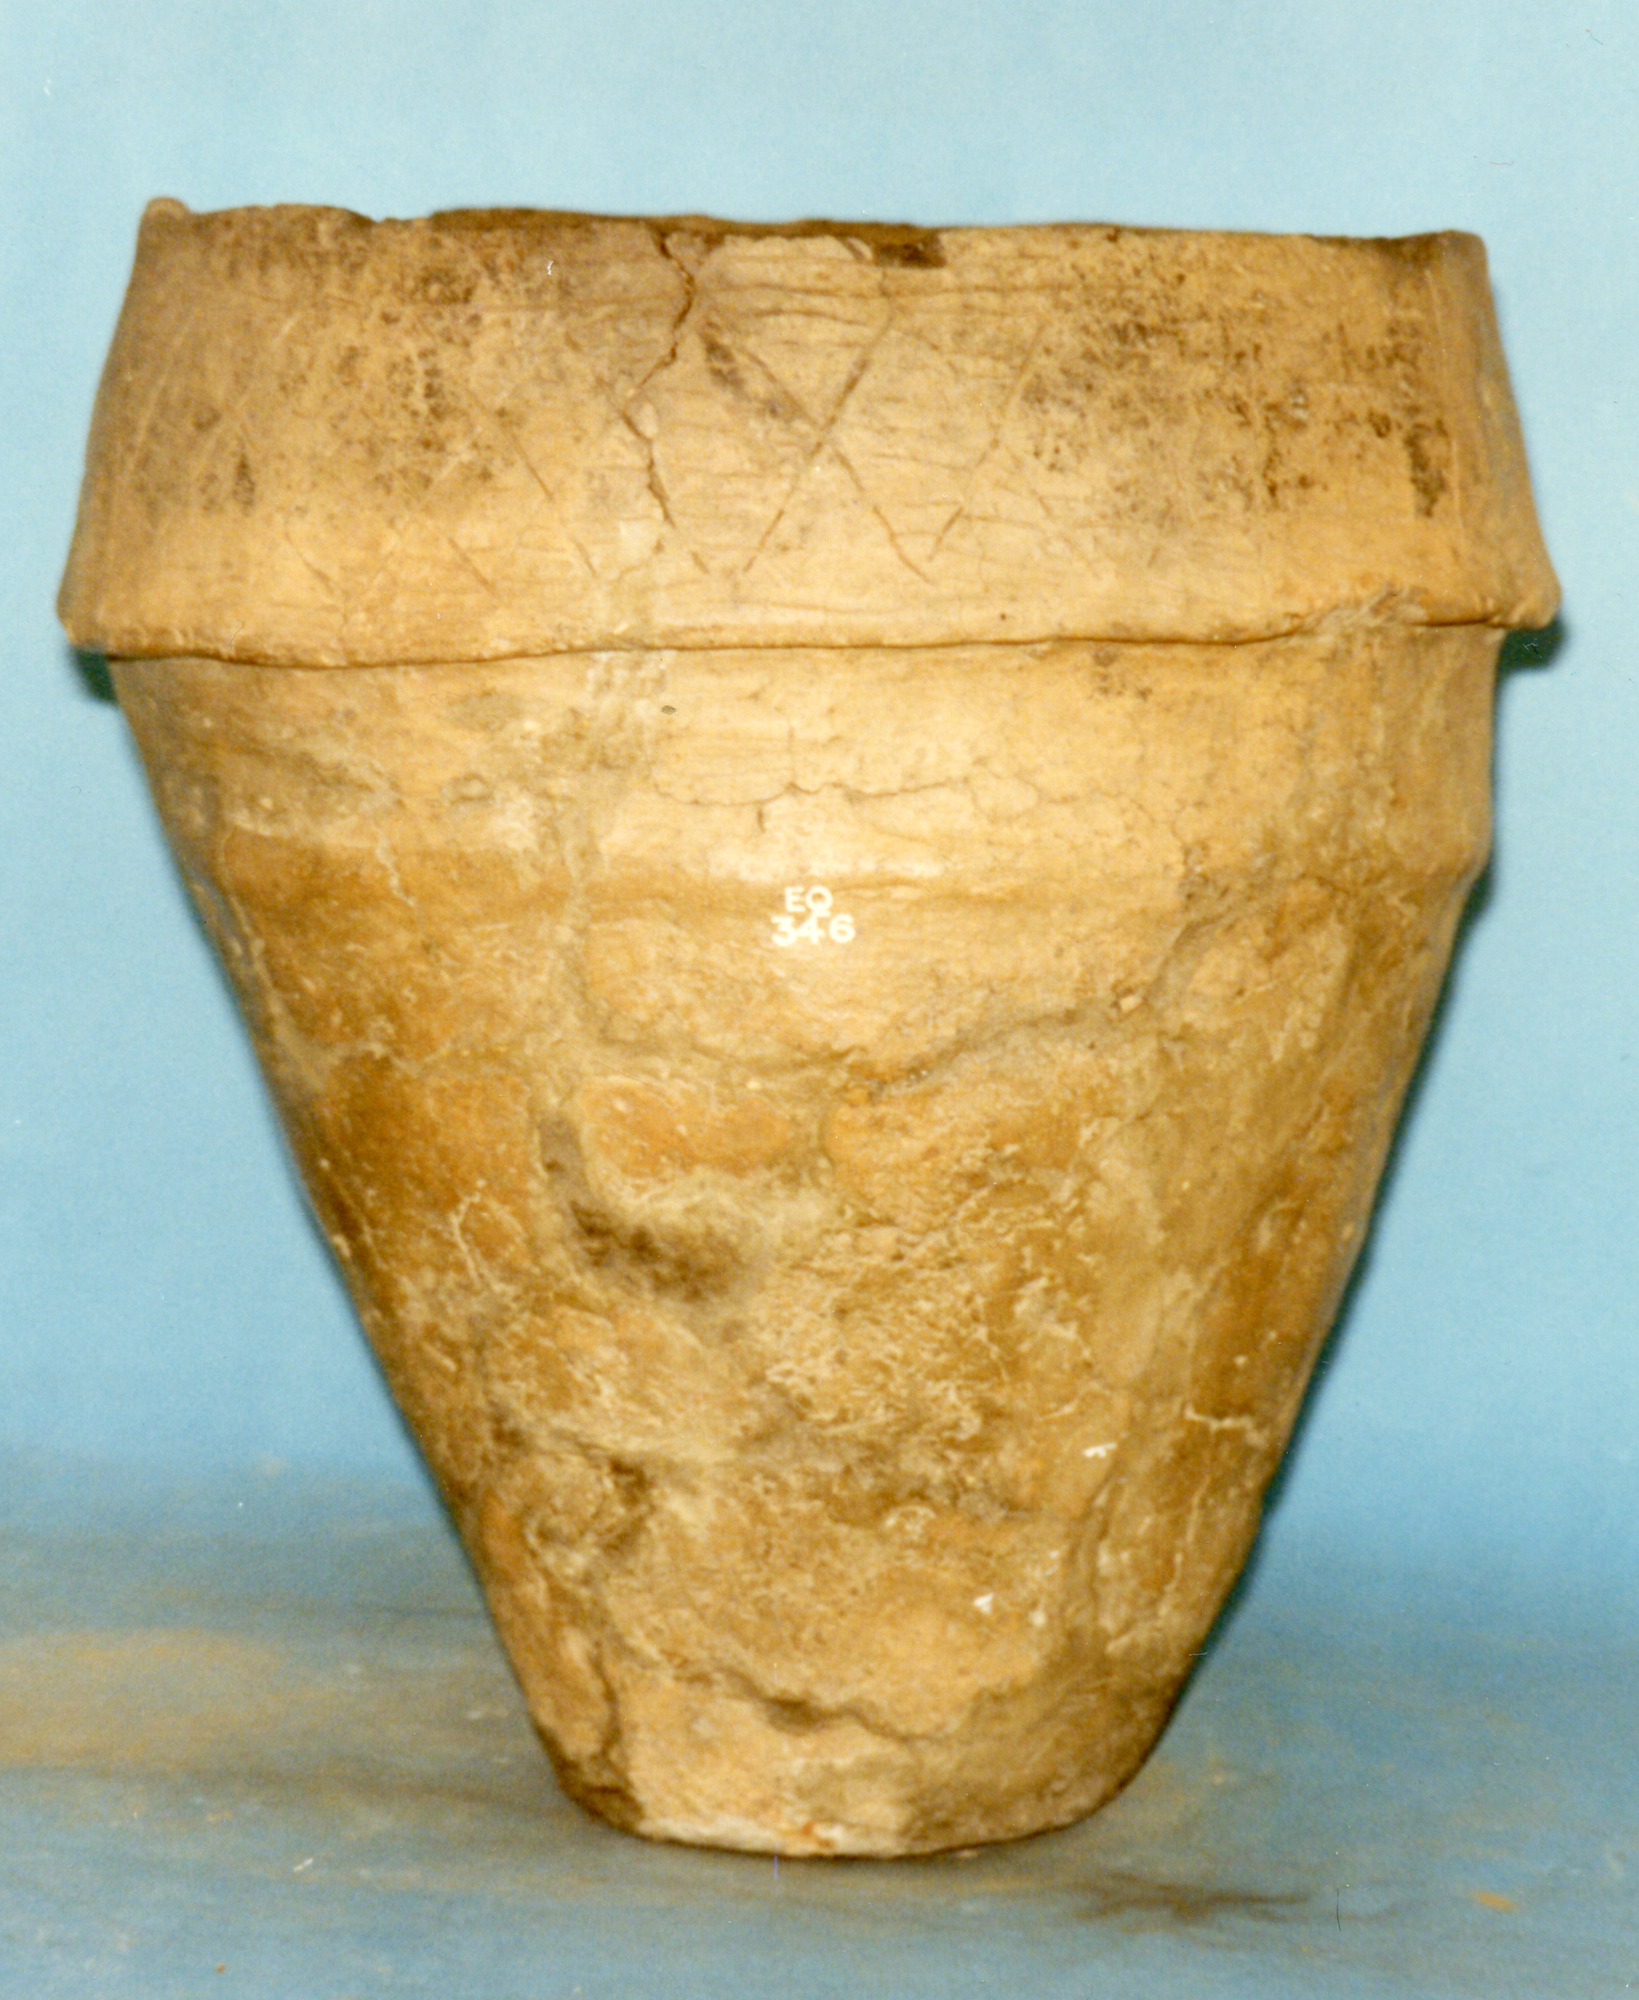 Image of Cinerary urn with overhanging rim, decorated with incised and impressed patterns, from Kettle Farm, Fife © National Museums Scotland